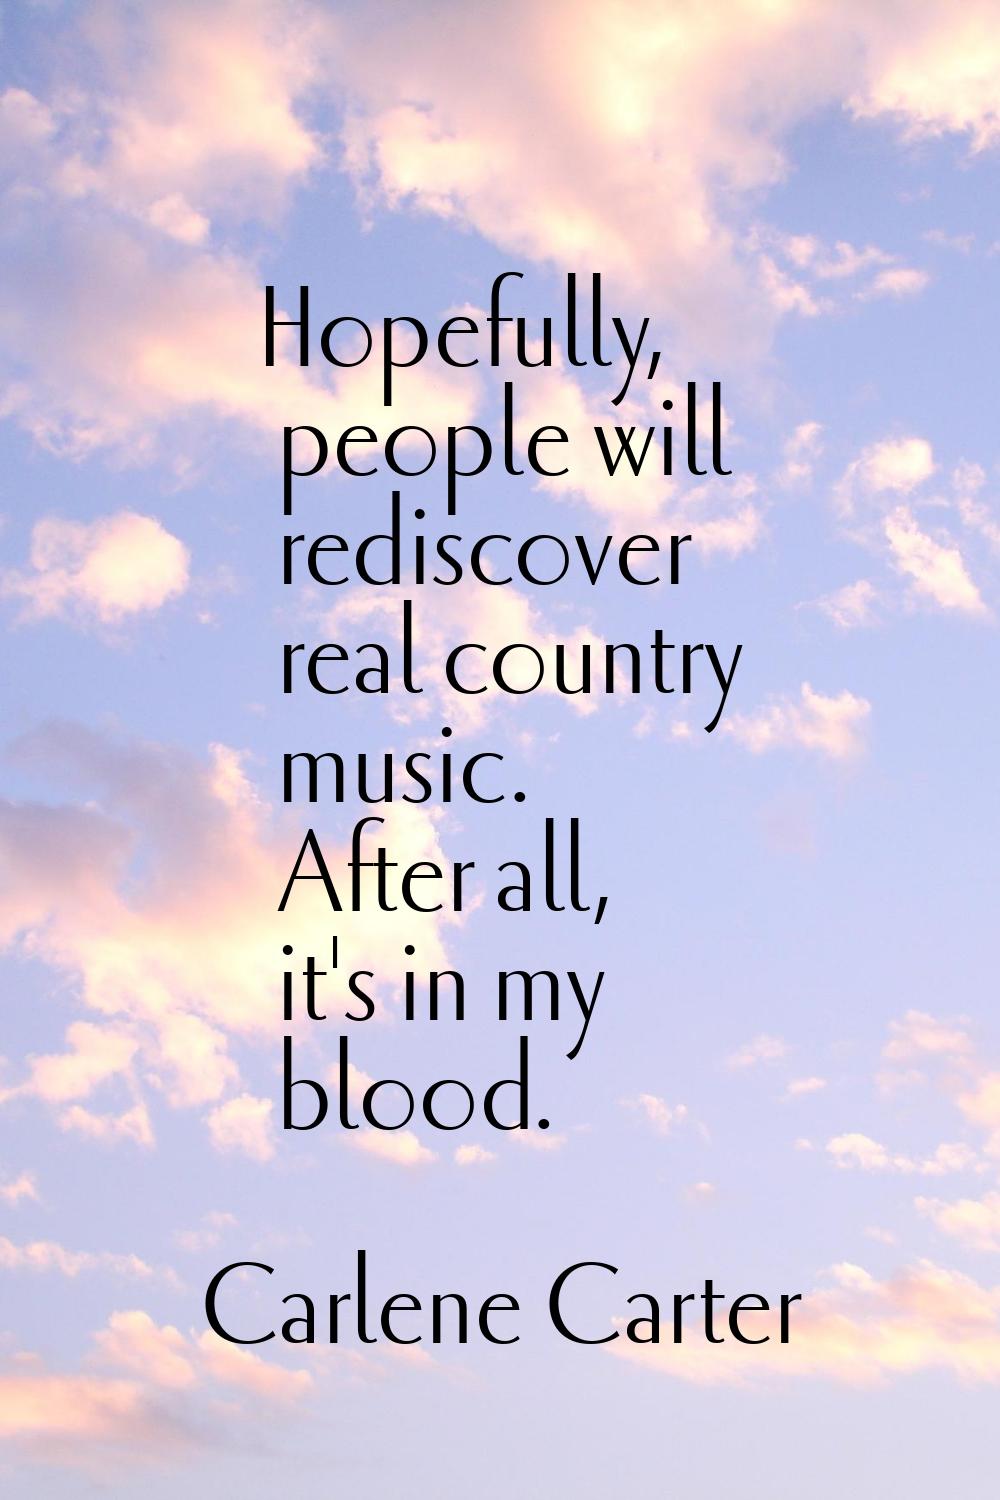 Hopefully, people will rediscover real country music. After all, it's in my blood.